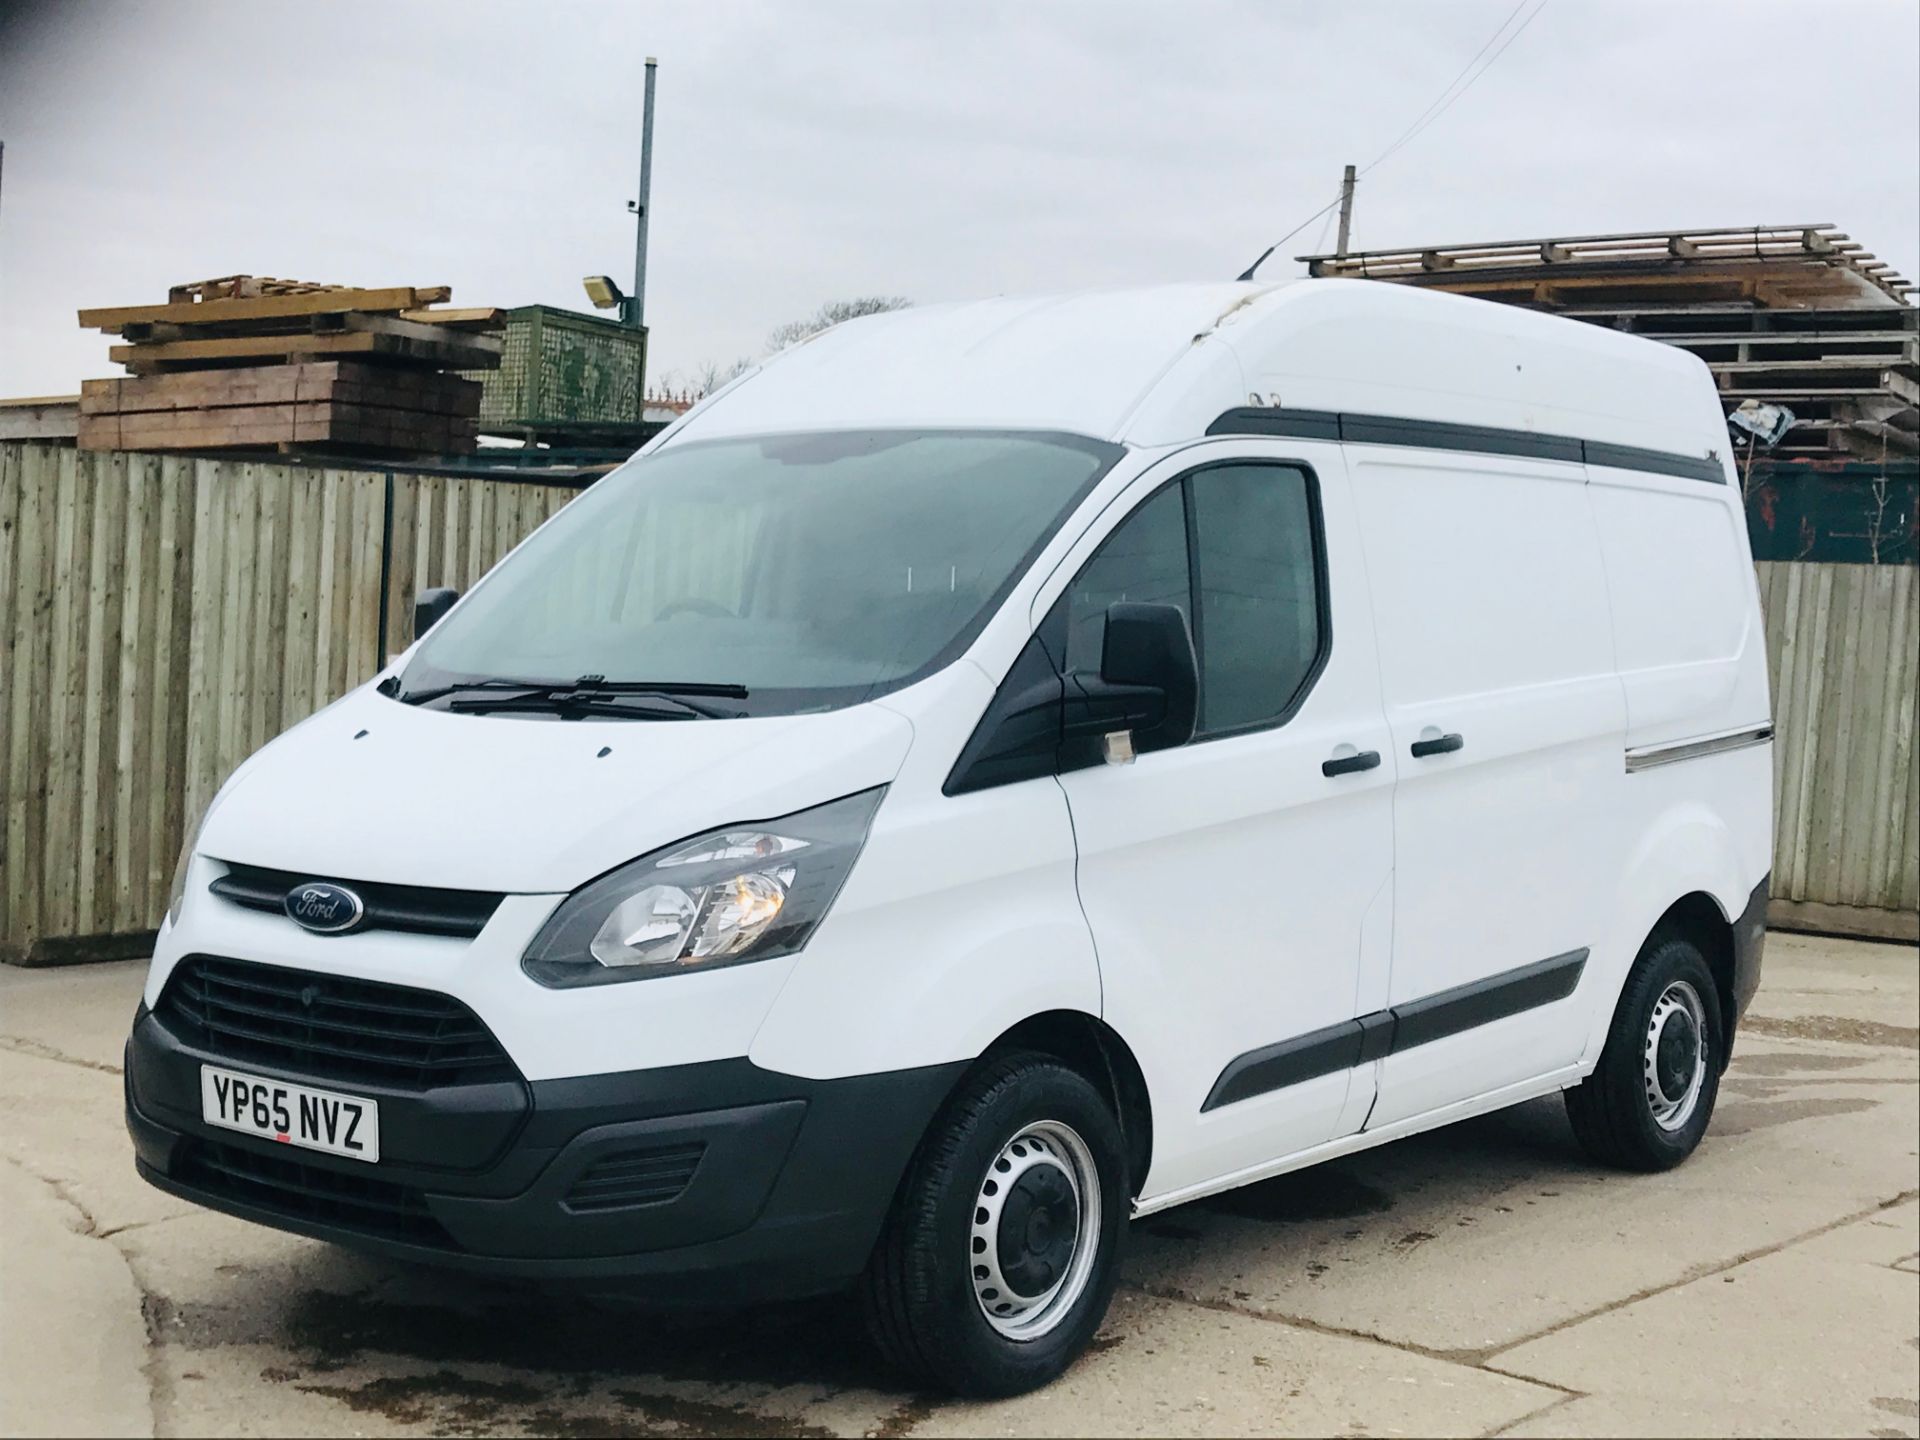 FORD TRANSIT CUSTOM ECO-TECH (2016 MODEL) HI TOP - 1 OWNER *AIR CON* *IDEADL CAMPER CONVERSION* - Image 3 of 32